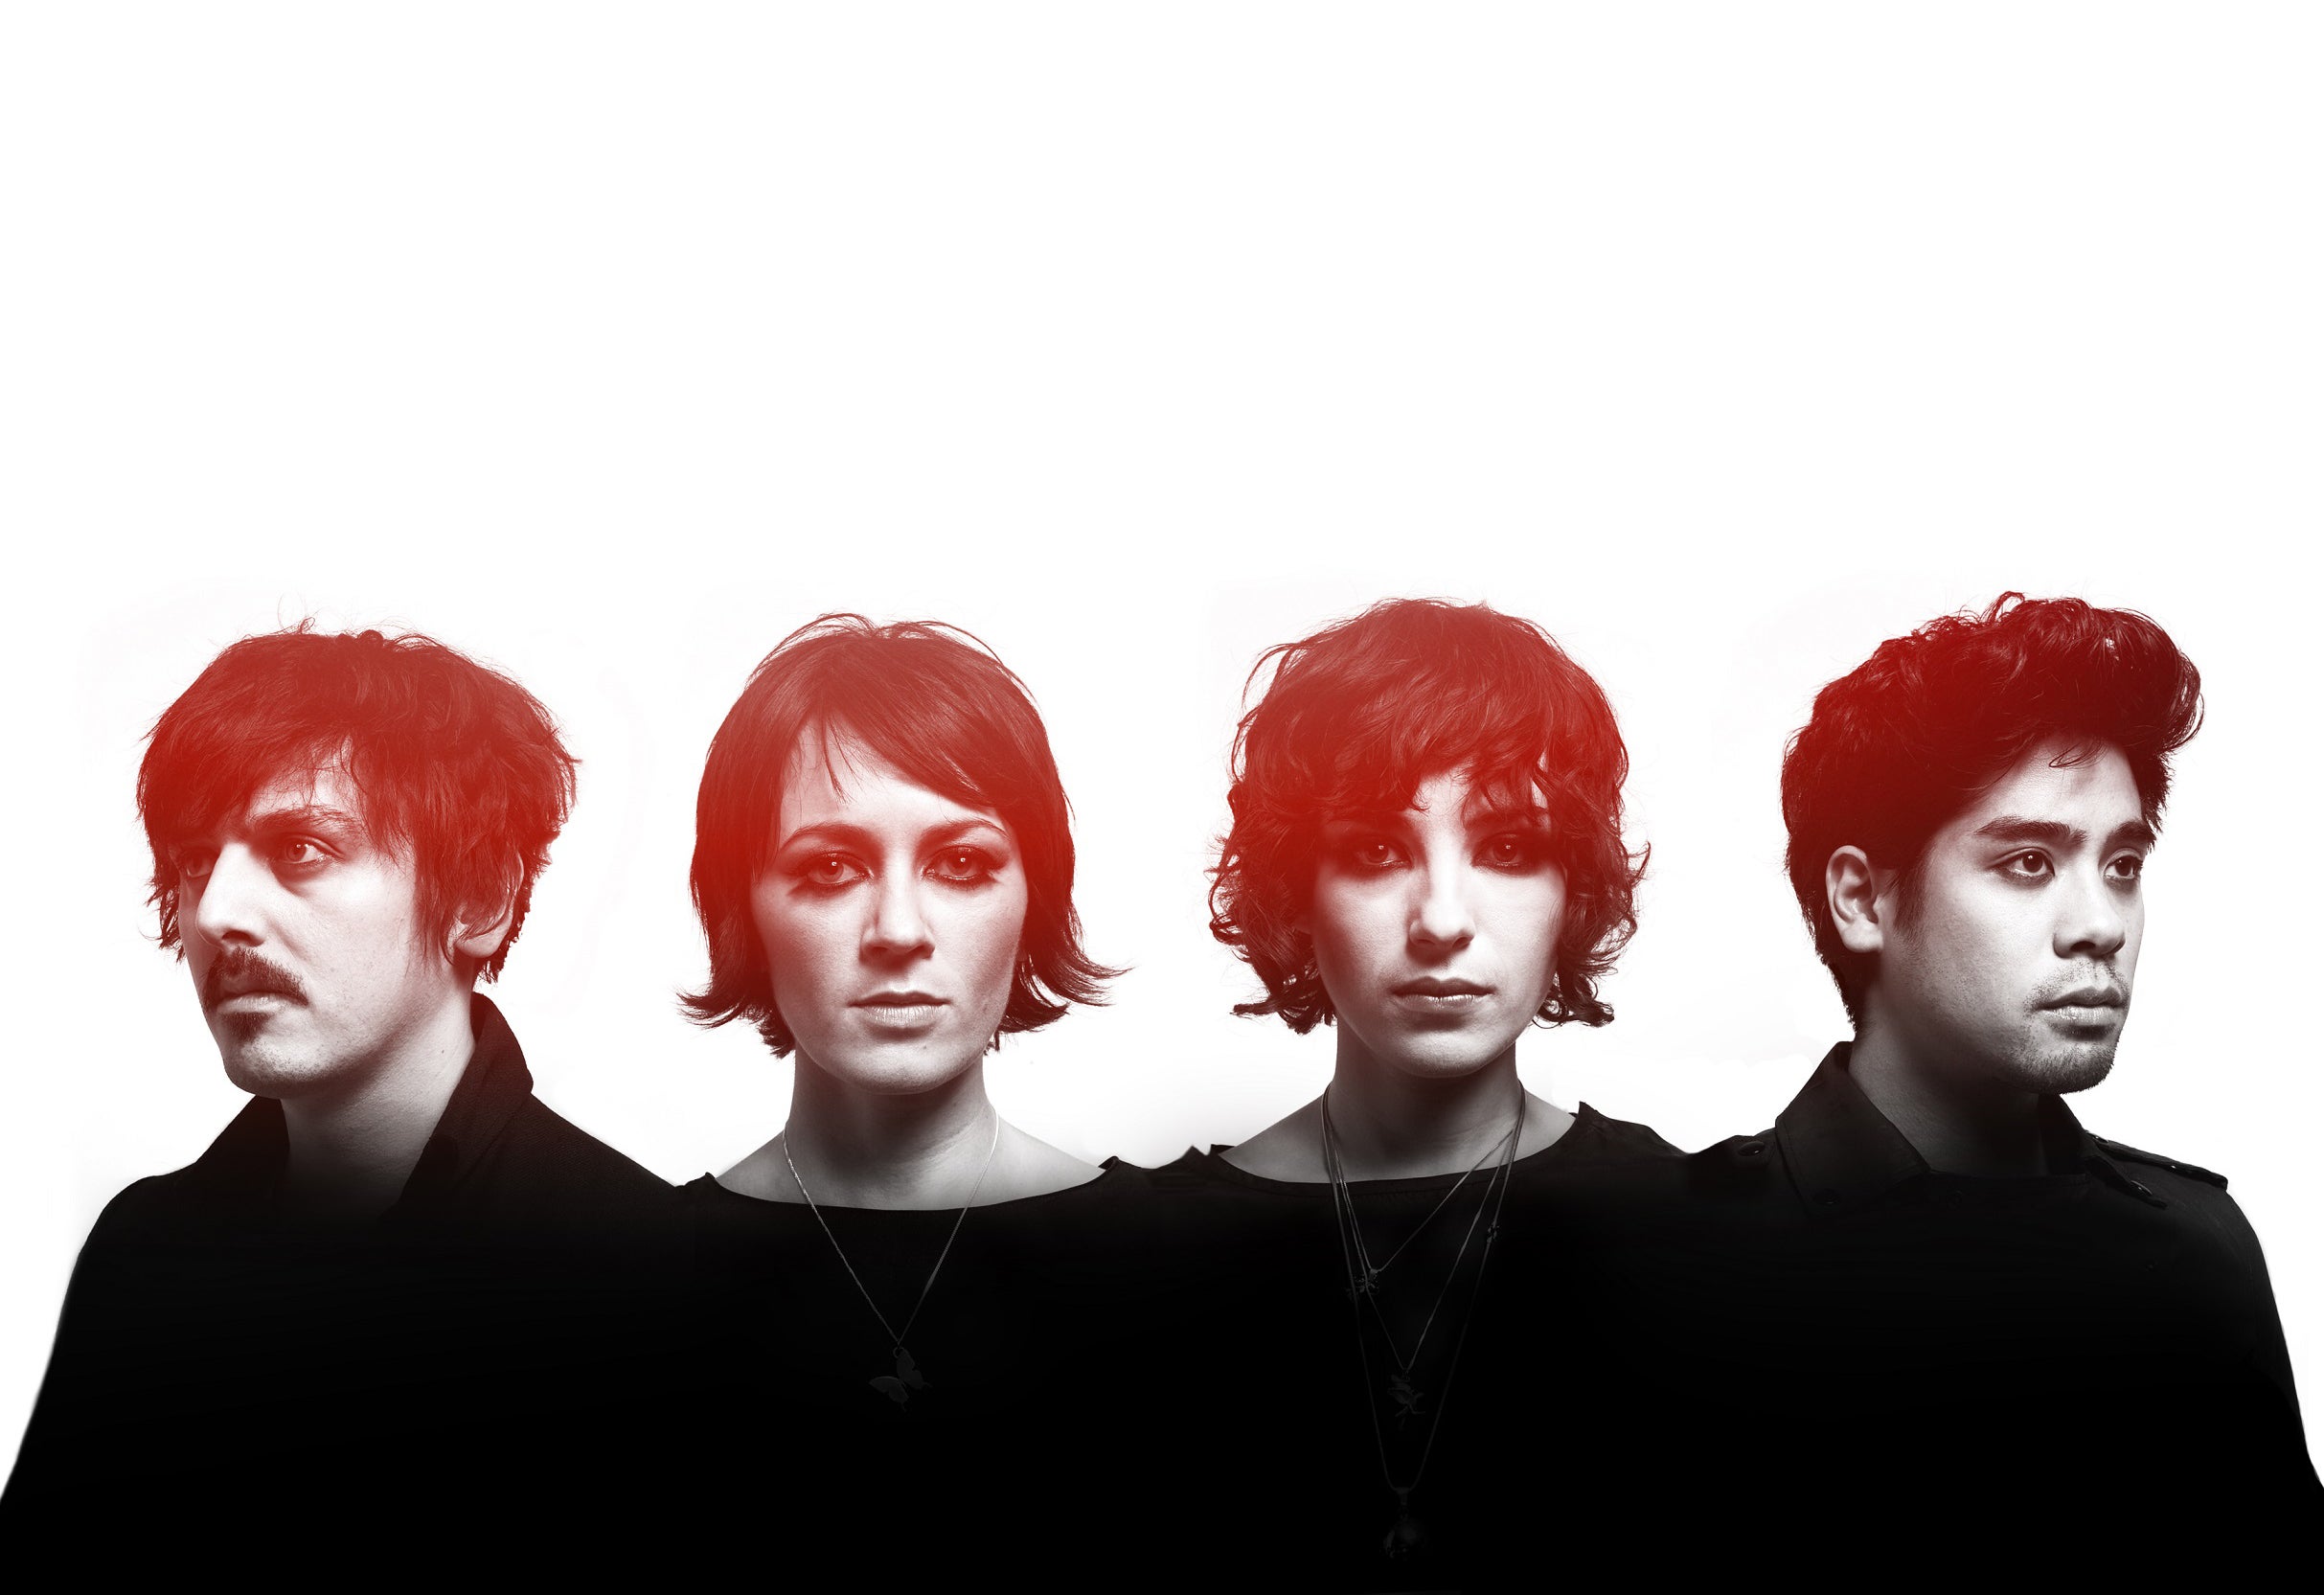 Ladytron free presale code for early tickets in New York